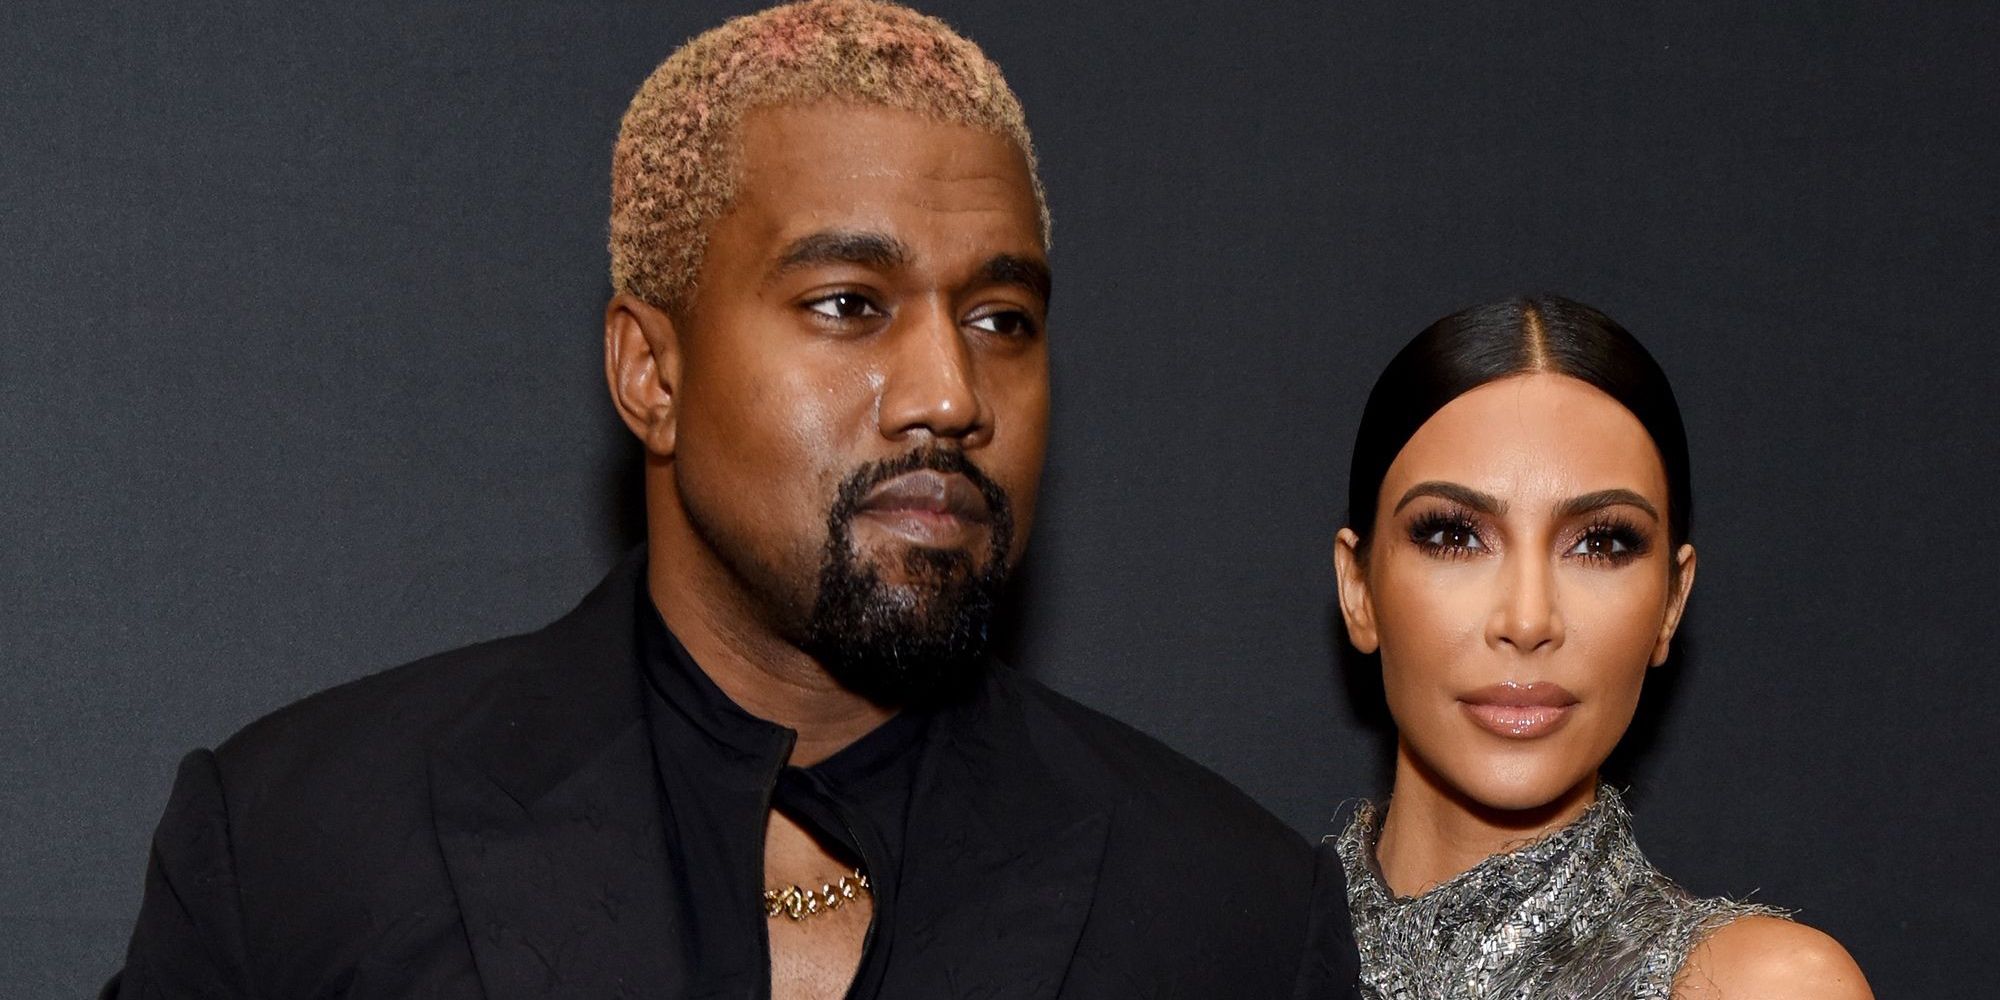 KUWTK: Kim Kardashian &amp; Kanye Reportedly &#39;In A Good Place&#39; Amid Divorce